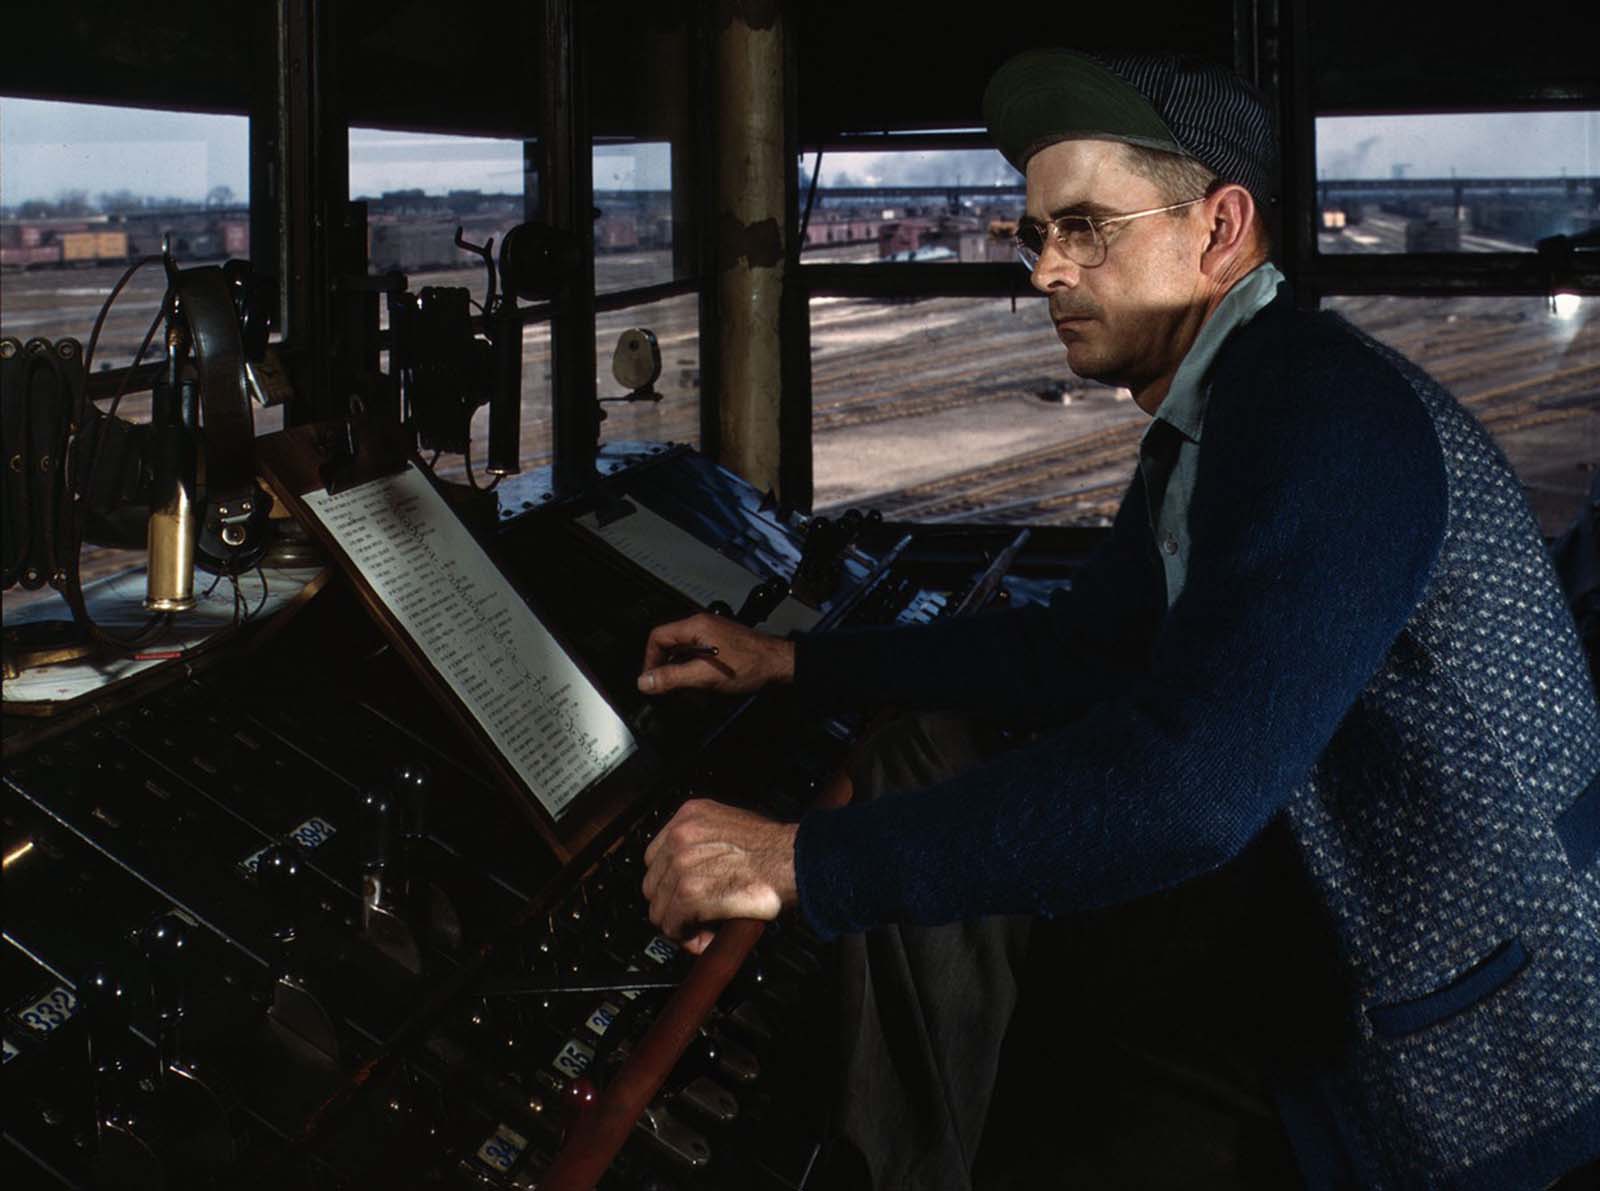 The Chicago and North Western Railroad tower man R. W. Mayberry of Elmhurst, Illinois, at work in the Proviso yard in May 1943.